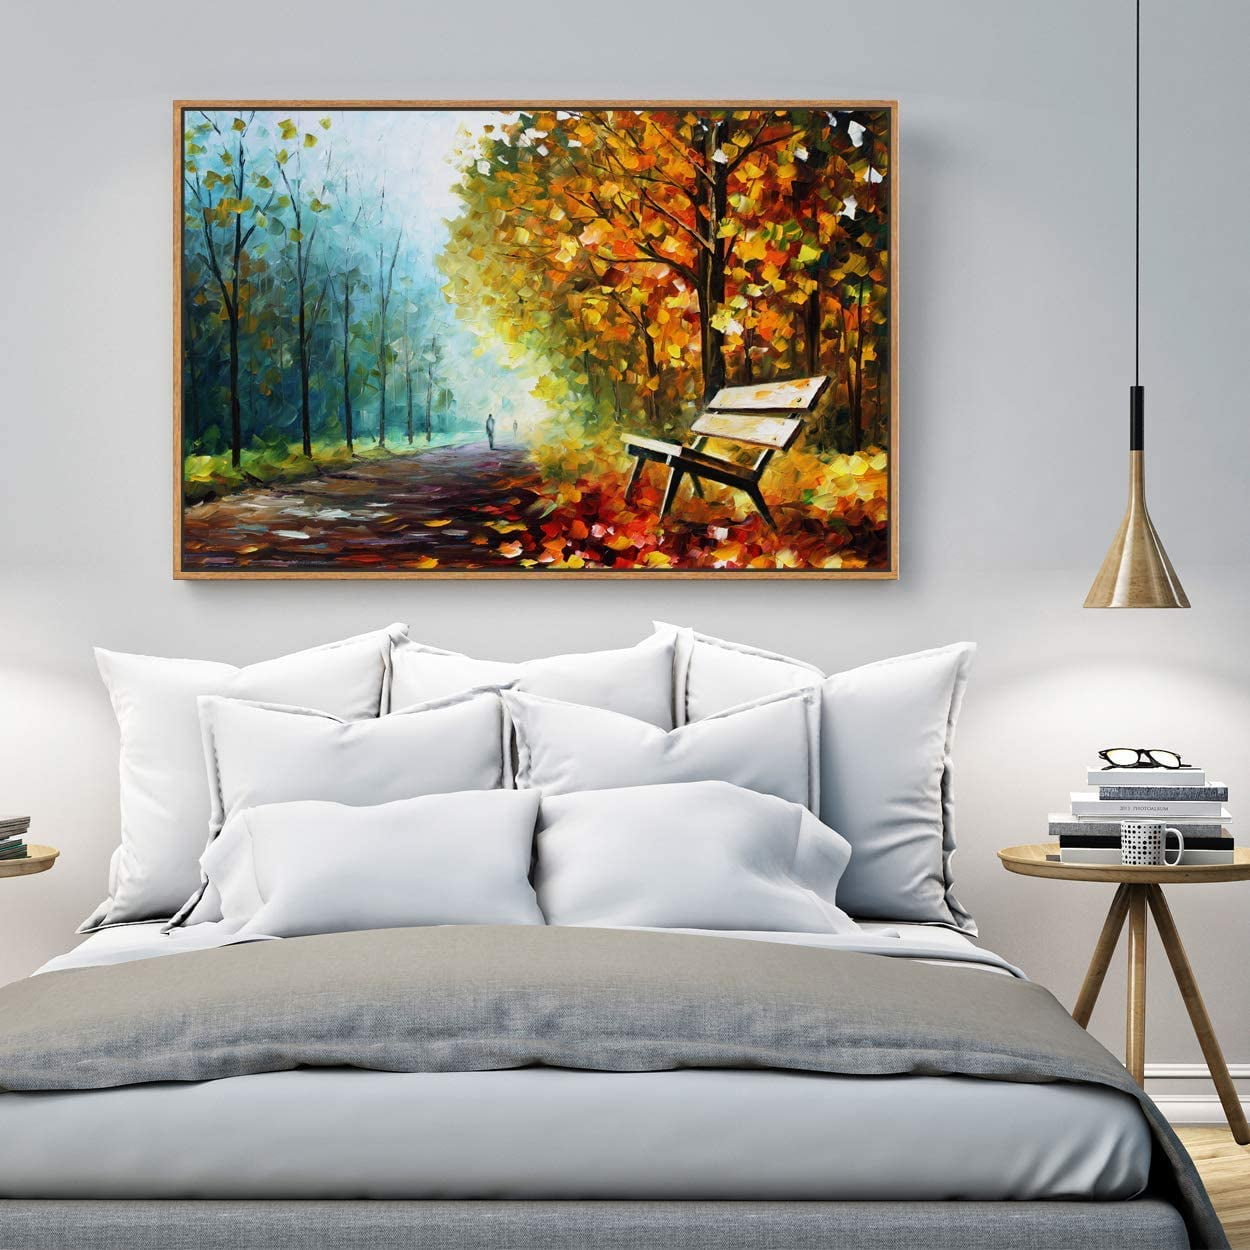 Home Decor Wall Art: Add A Touch Of Beauty To Your Home